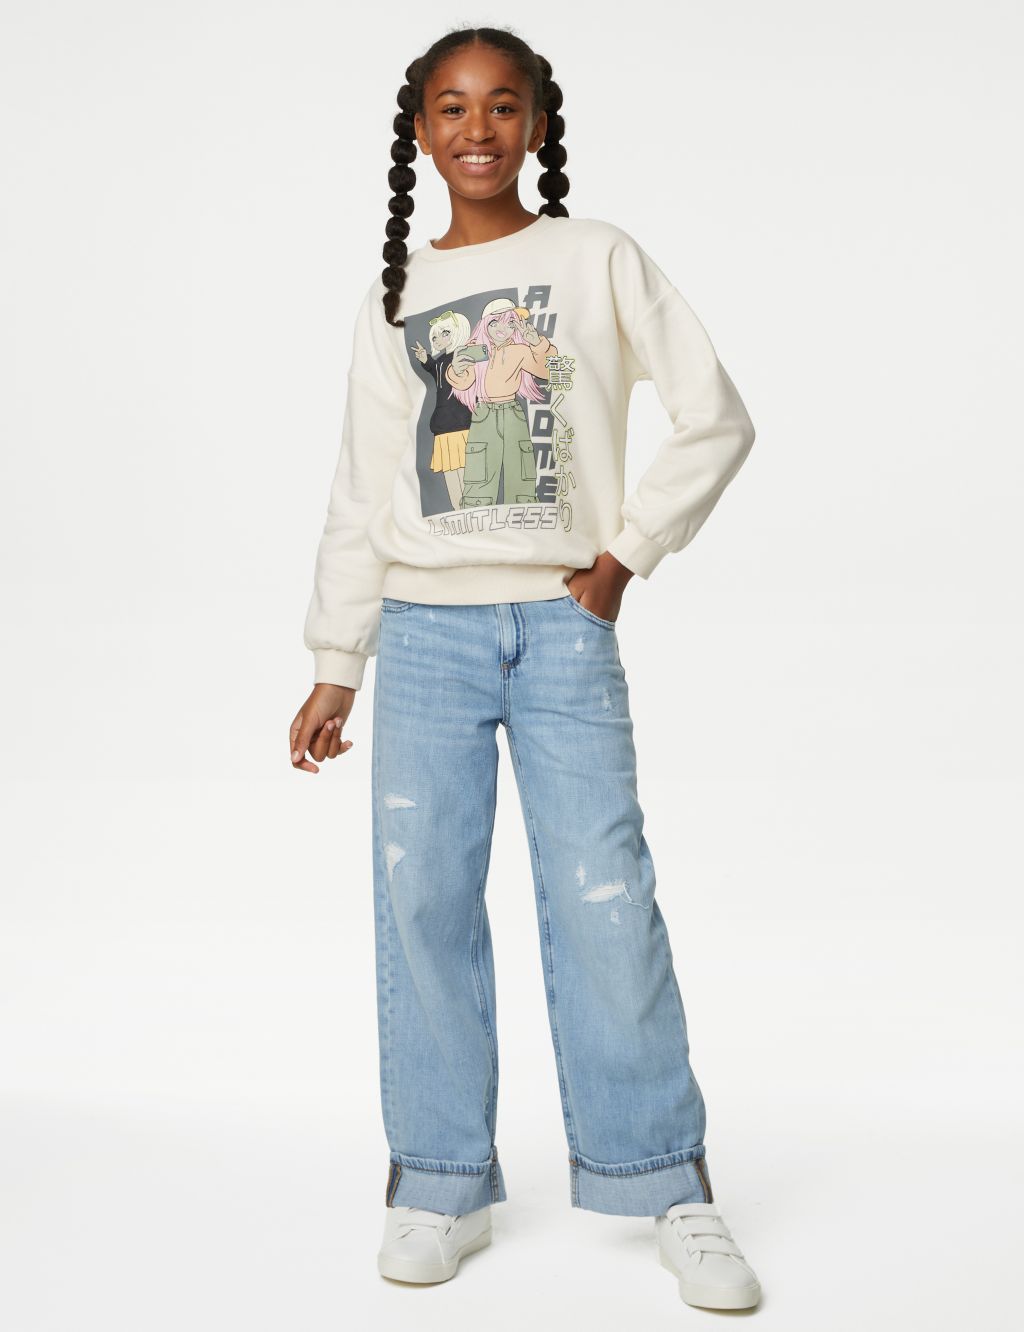 Girls’ Jumpers | M&S